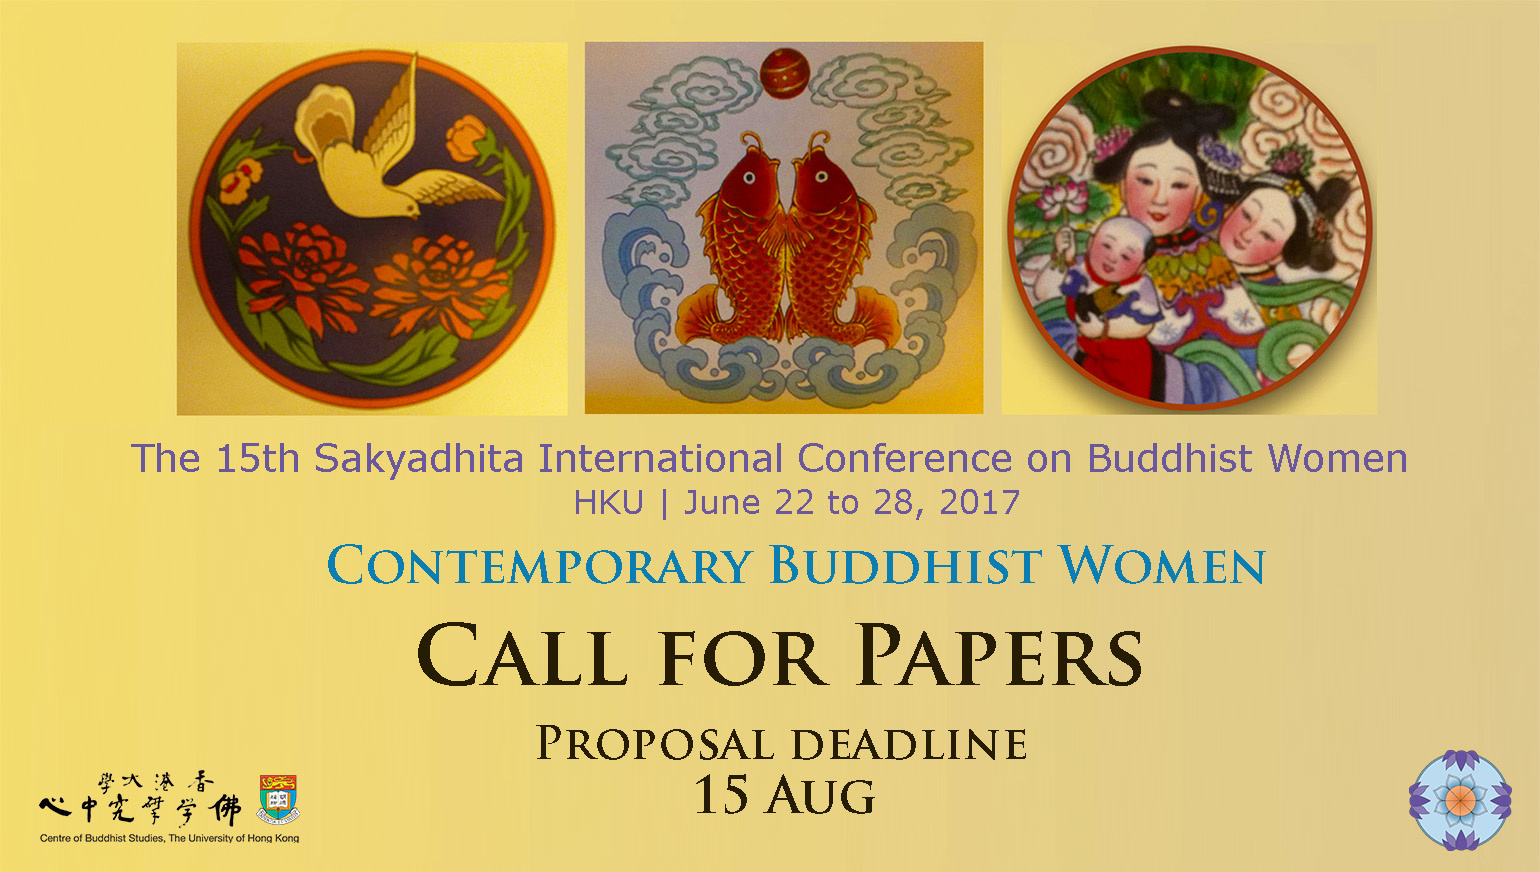 Conference on Buddhist Women